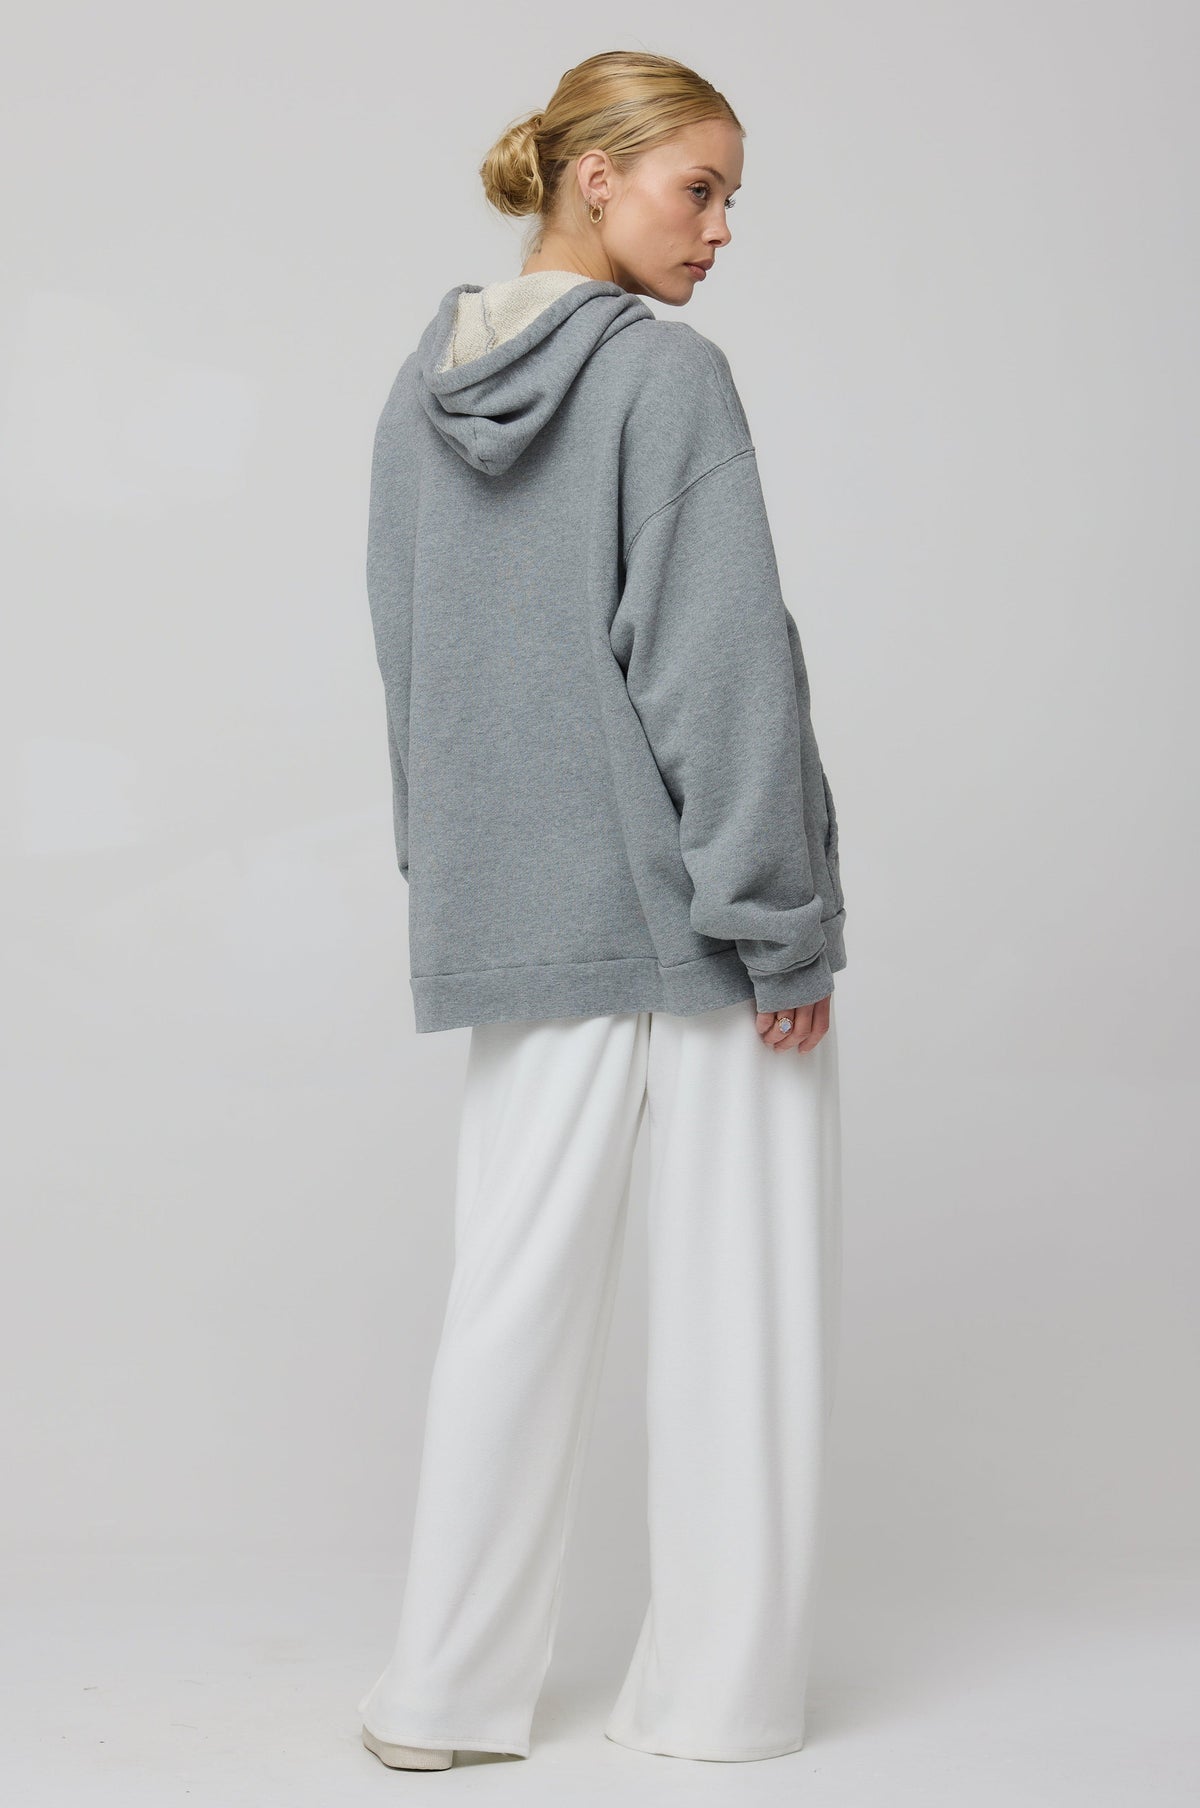 This is an image of Leo Hoodie in Grey - RESA featuring a model wearing the dress